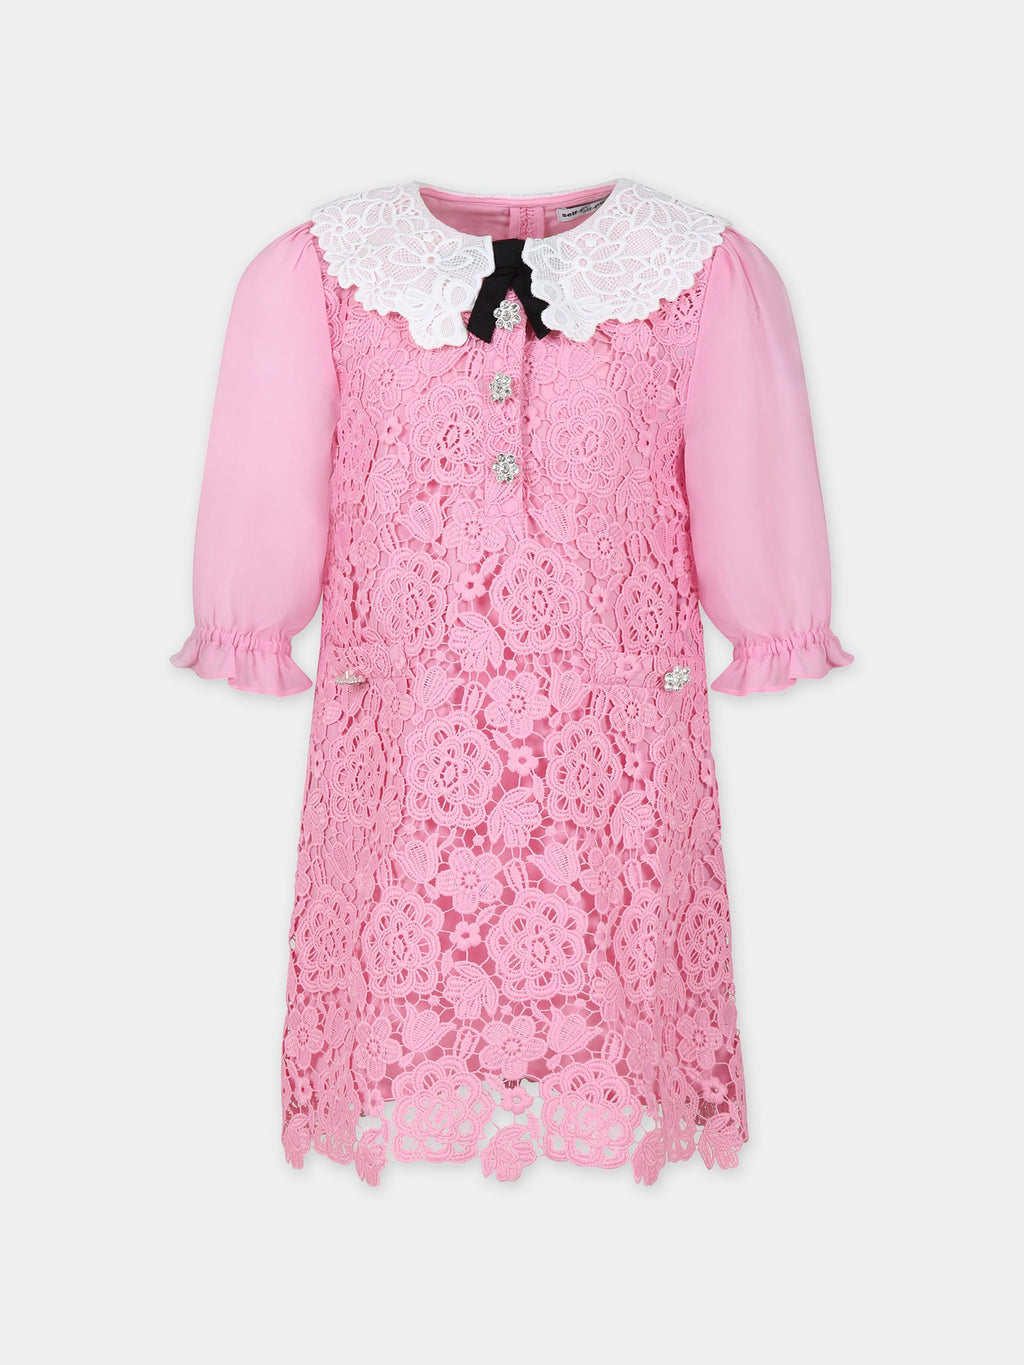 Pink elegant dress for girl in macramé lace